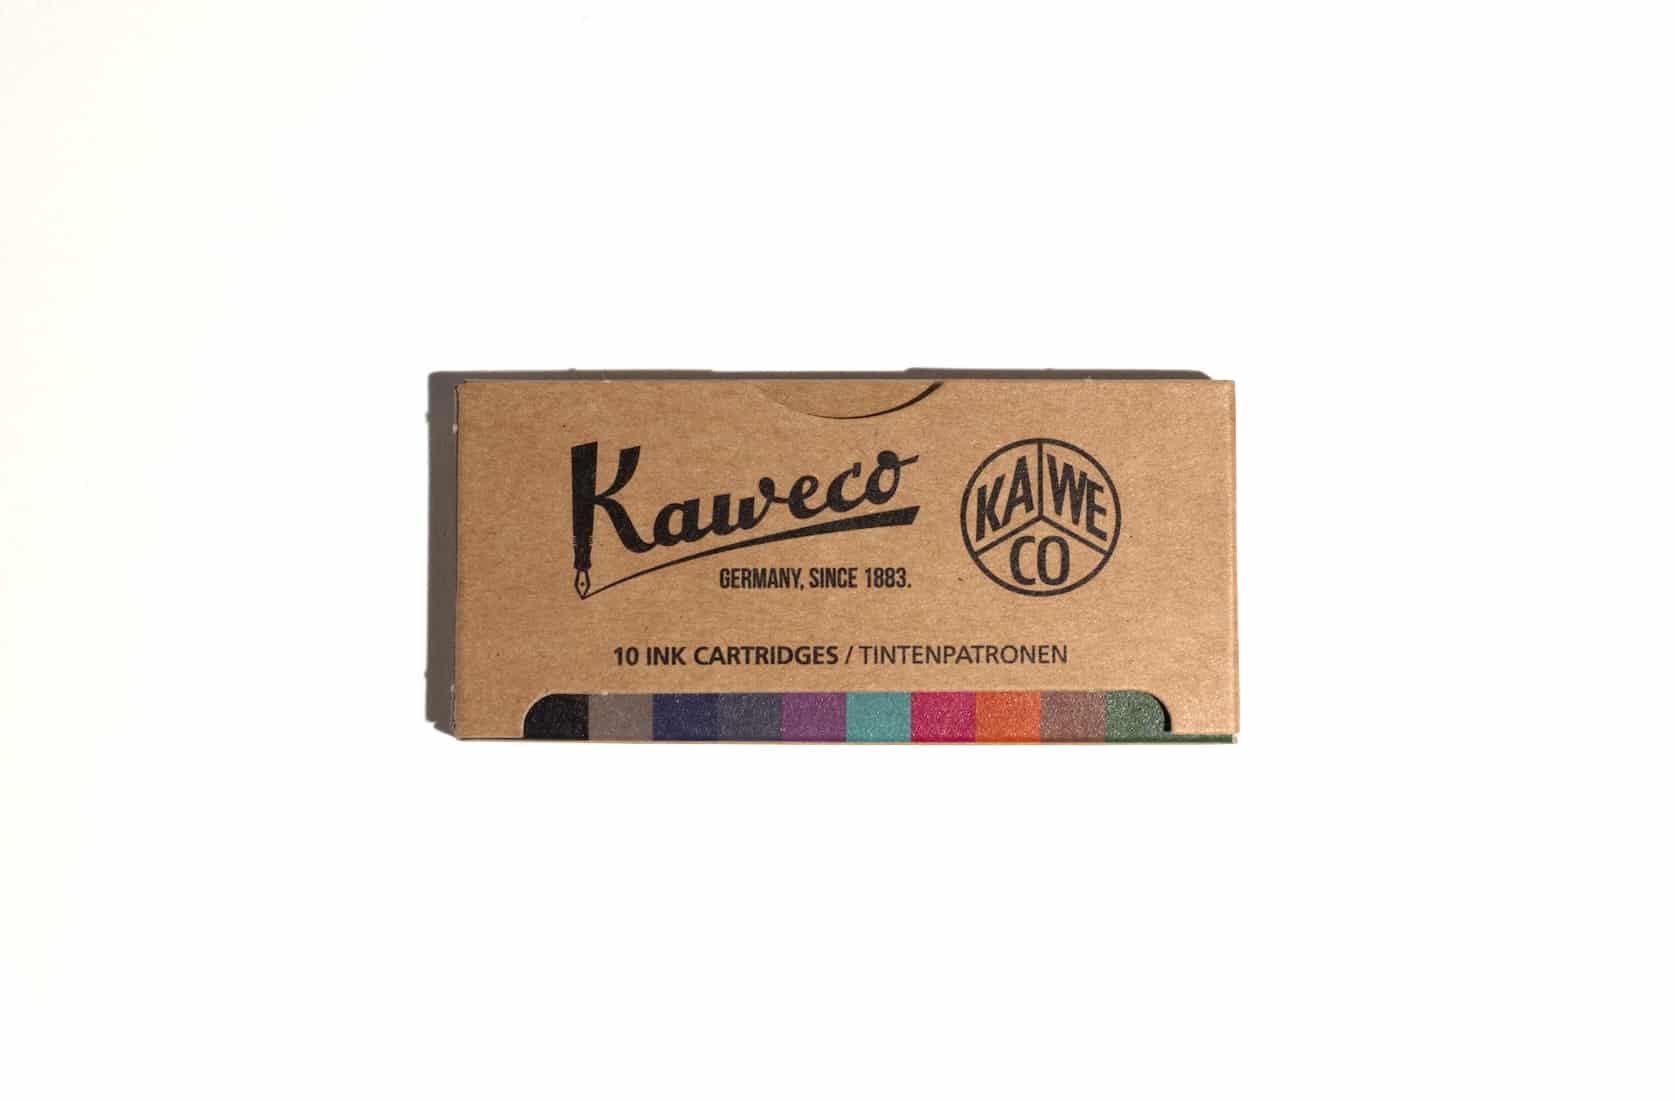 A box of ink cartridges lies on a white surface. Text on packaging reads: Kaweco. Kaweco logo. Germany, since 1883. 10 Ink Cartridges / Tintenpatronen. At the bottom of the box ten different shades of colour are visible.